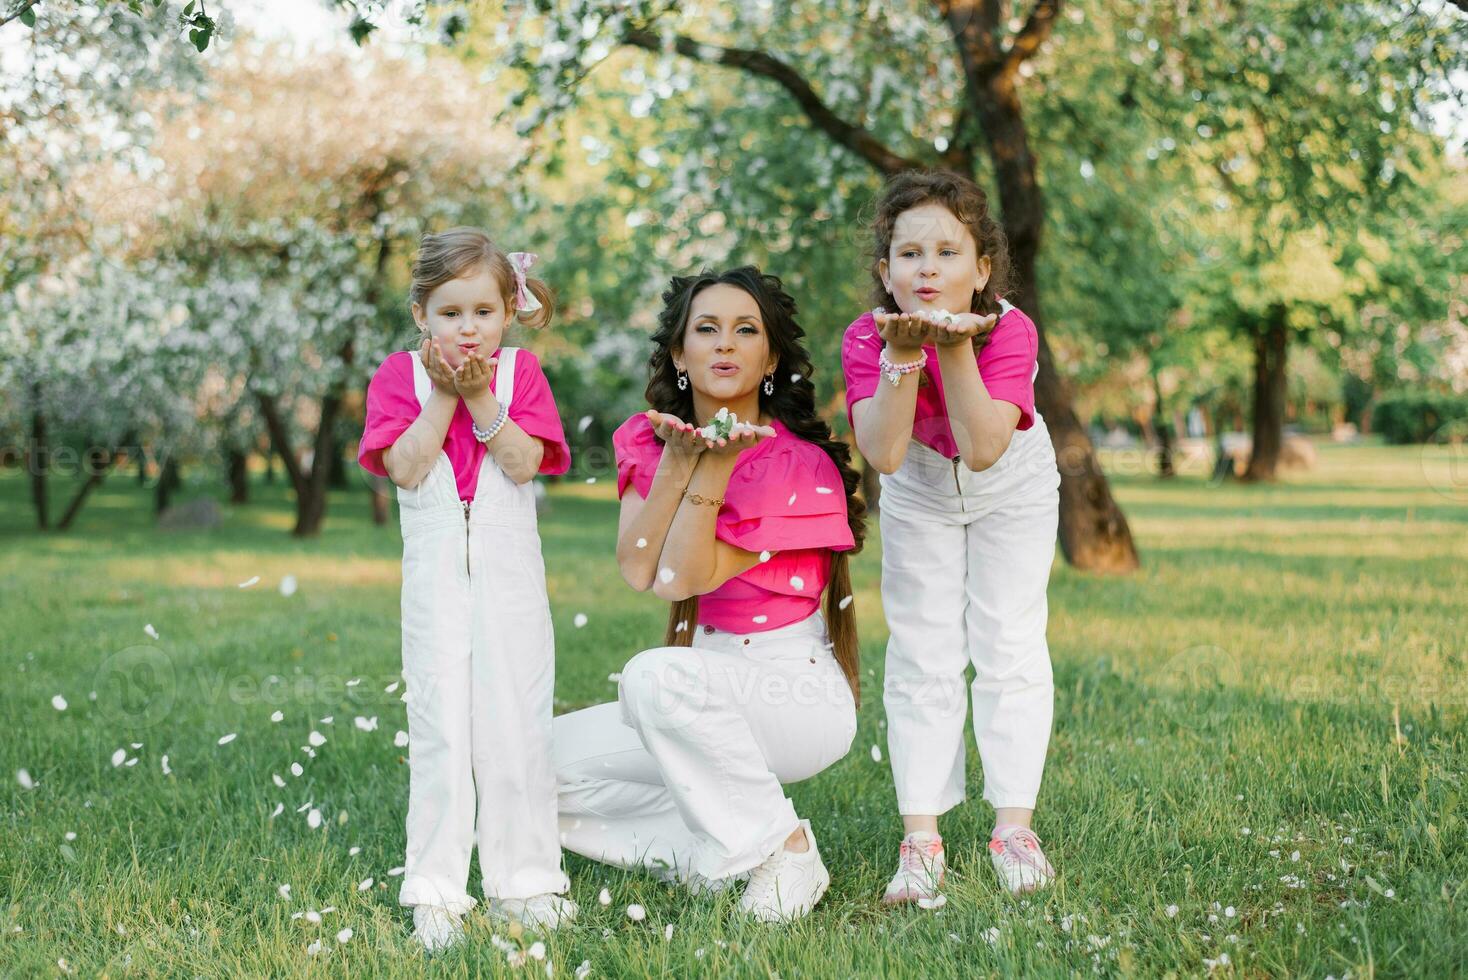 Cute mom and two daughters blowing on the fallen petals of apple blossoms in the spring garden. Outdoor activity. Sweet moments family photo